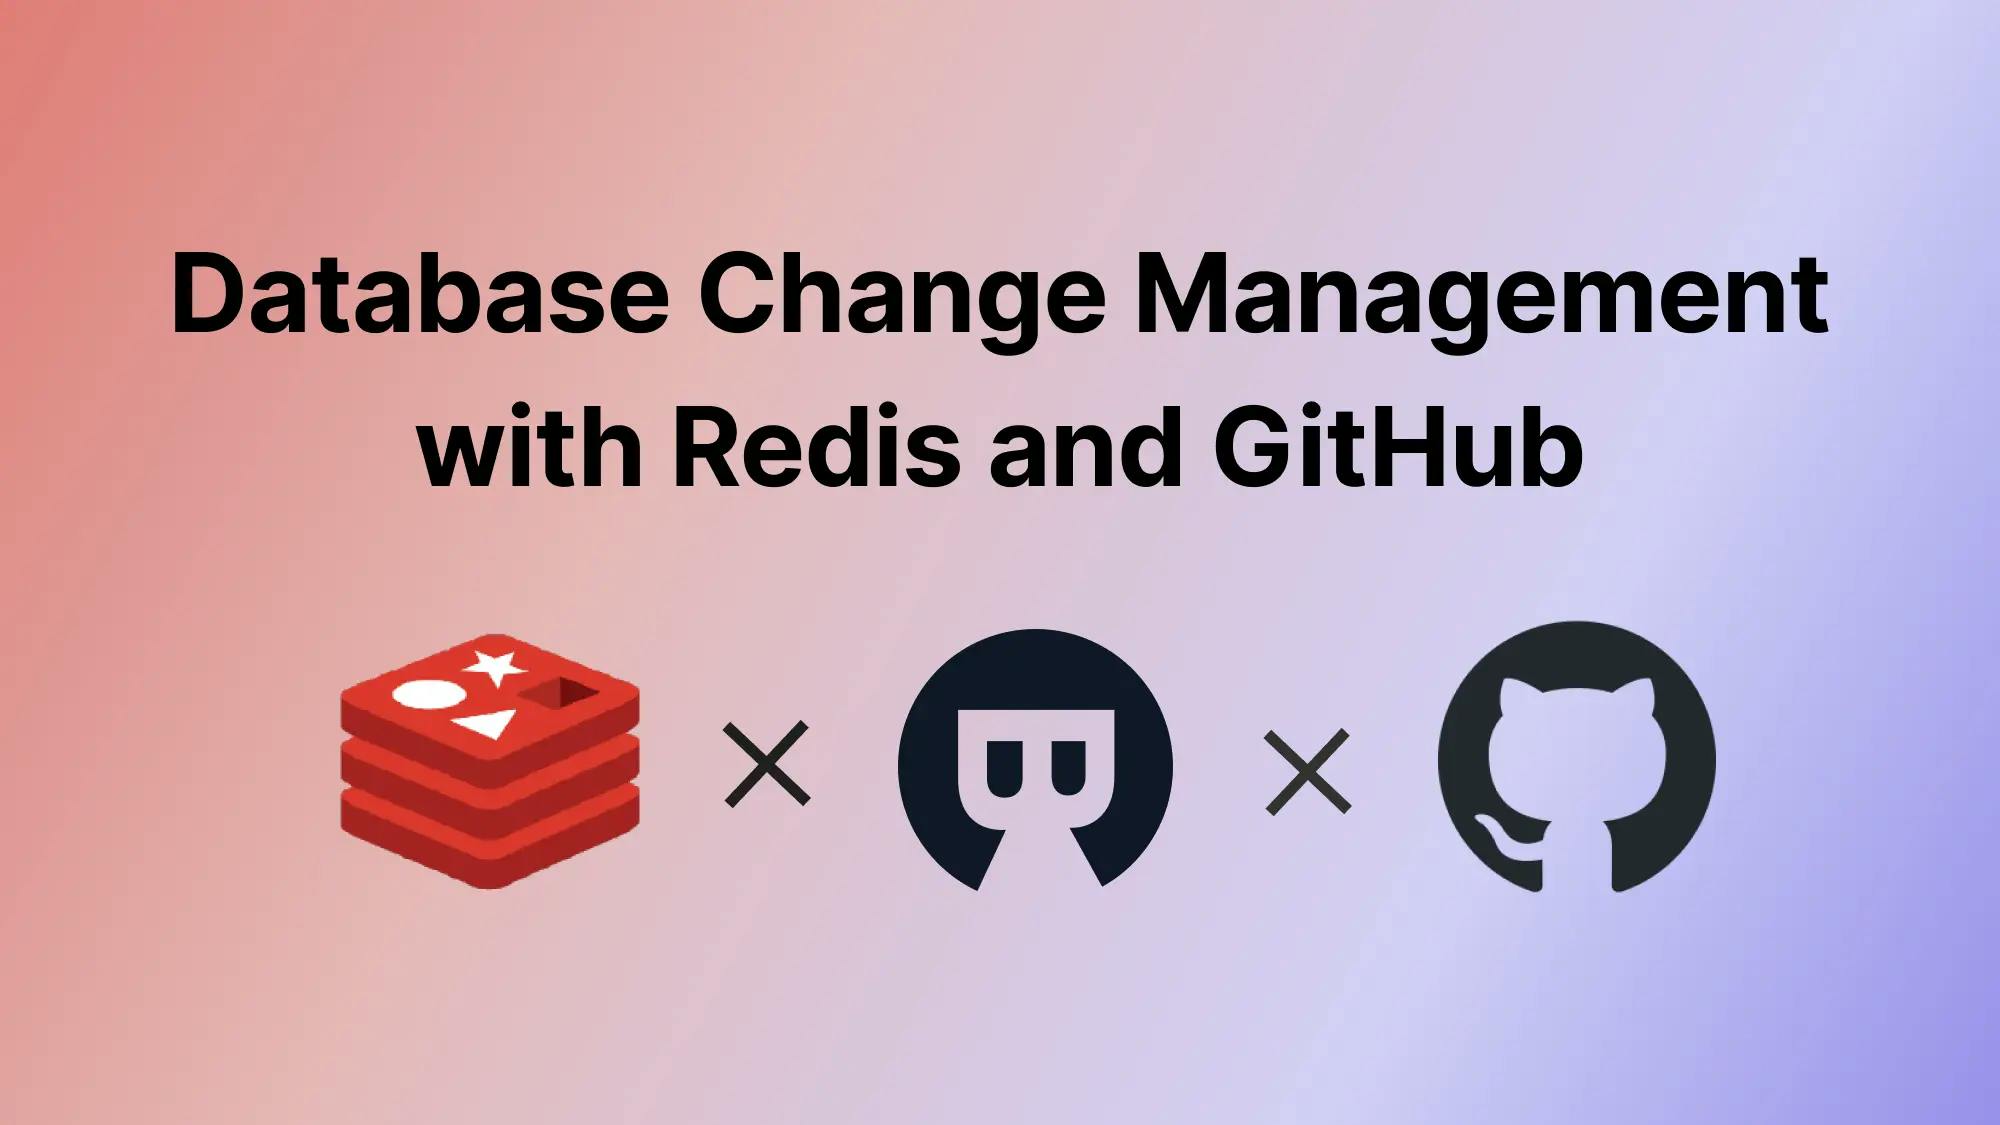 DevOps: Database Change Management with Redis and GitHub